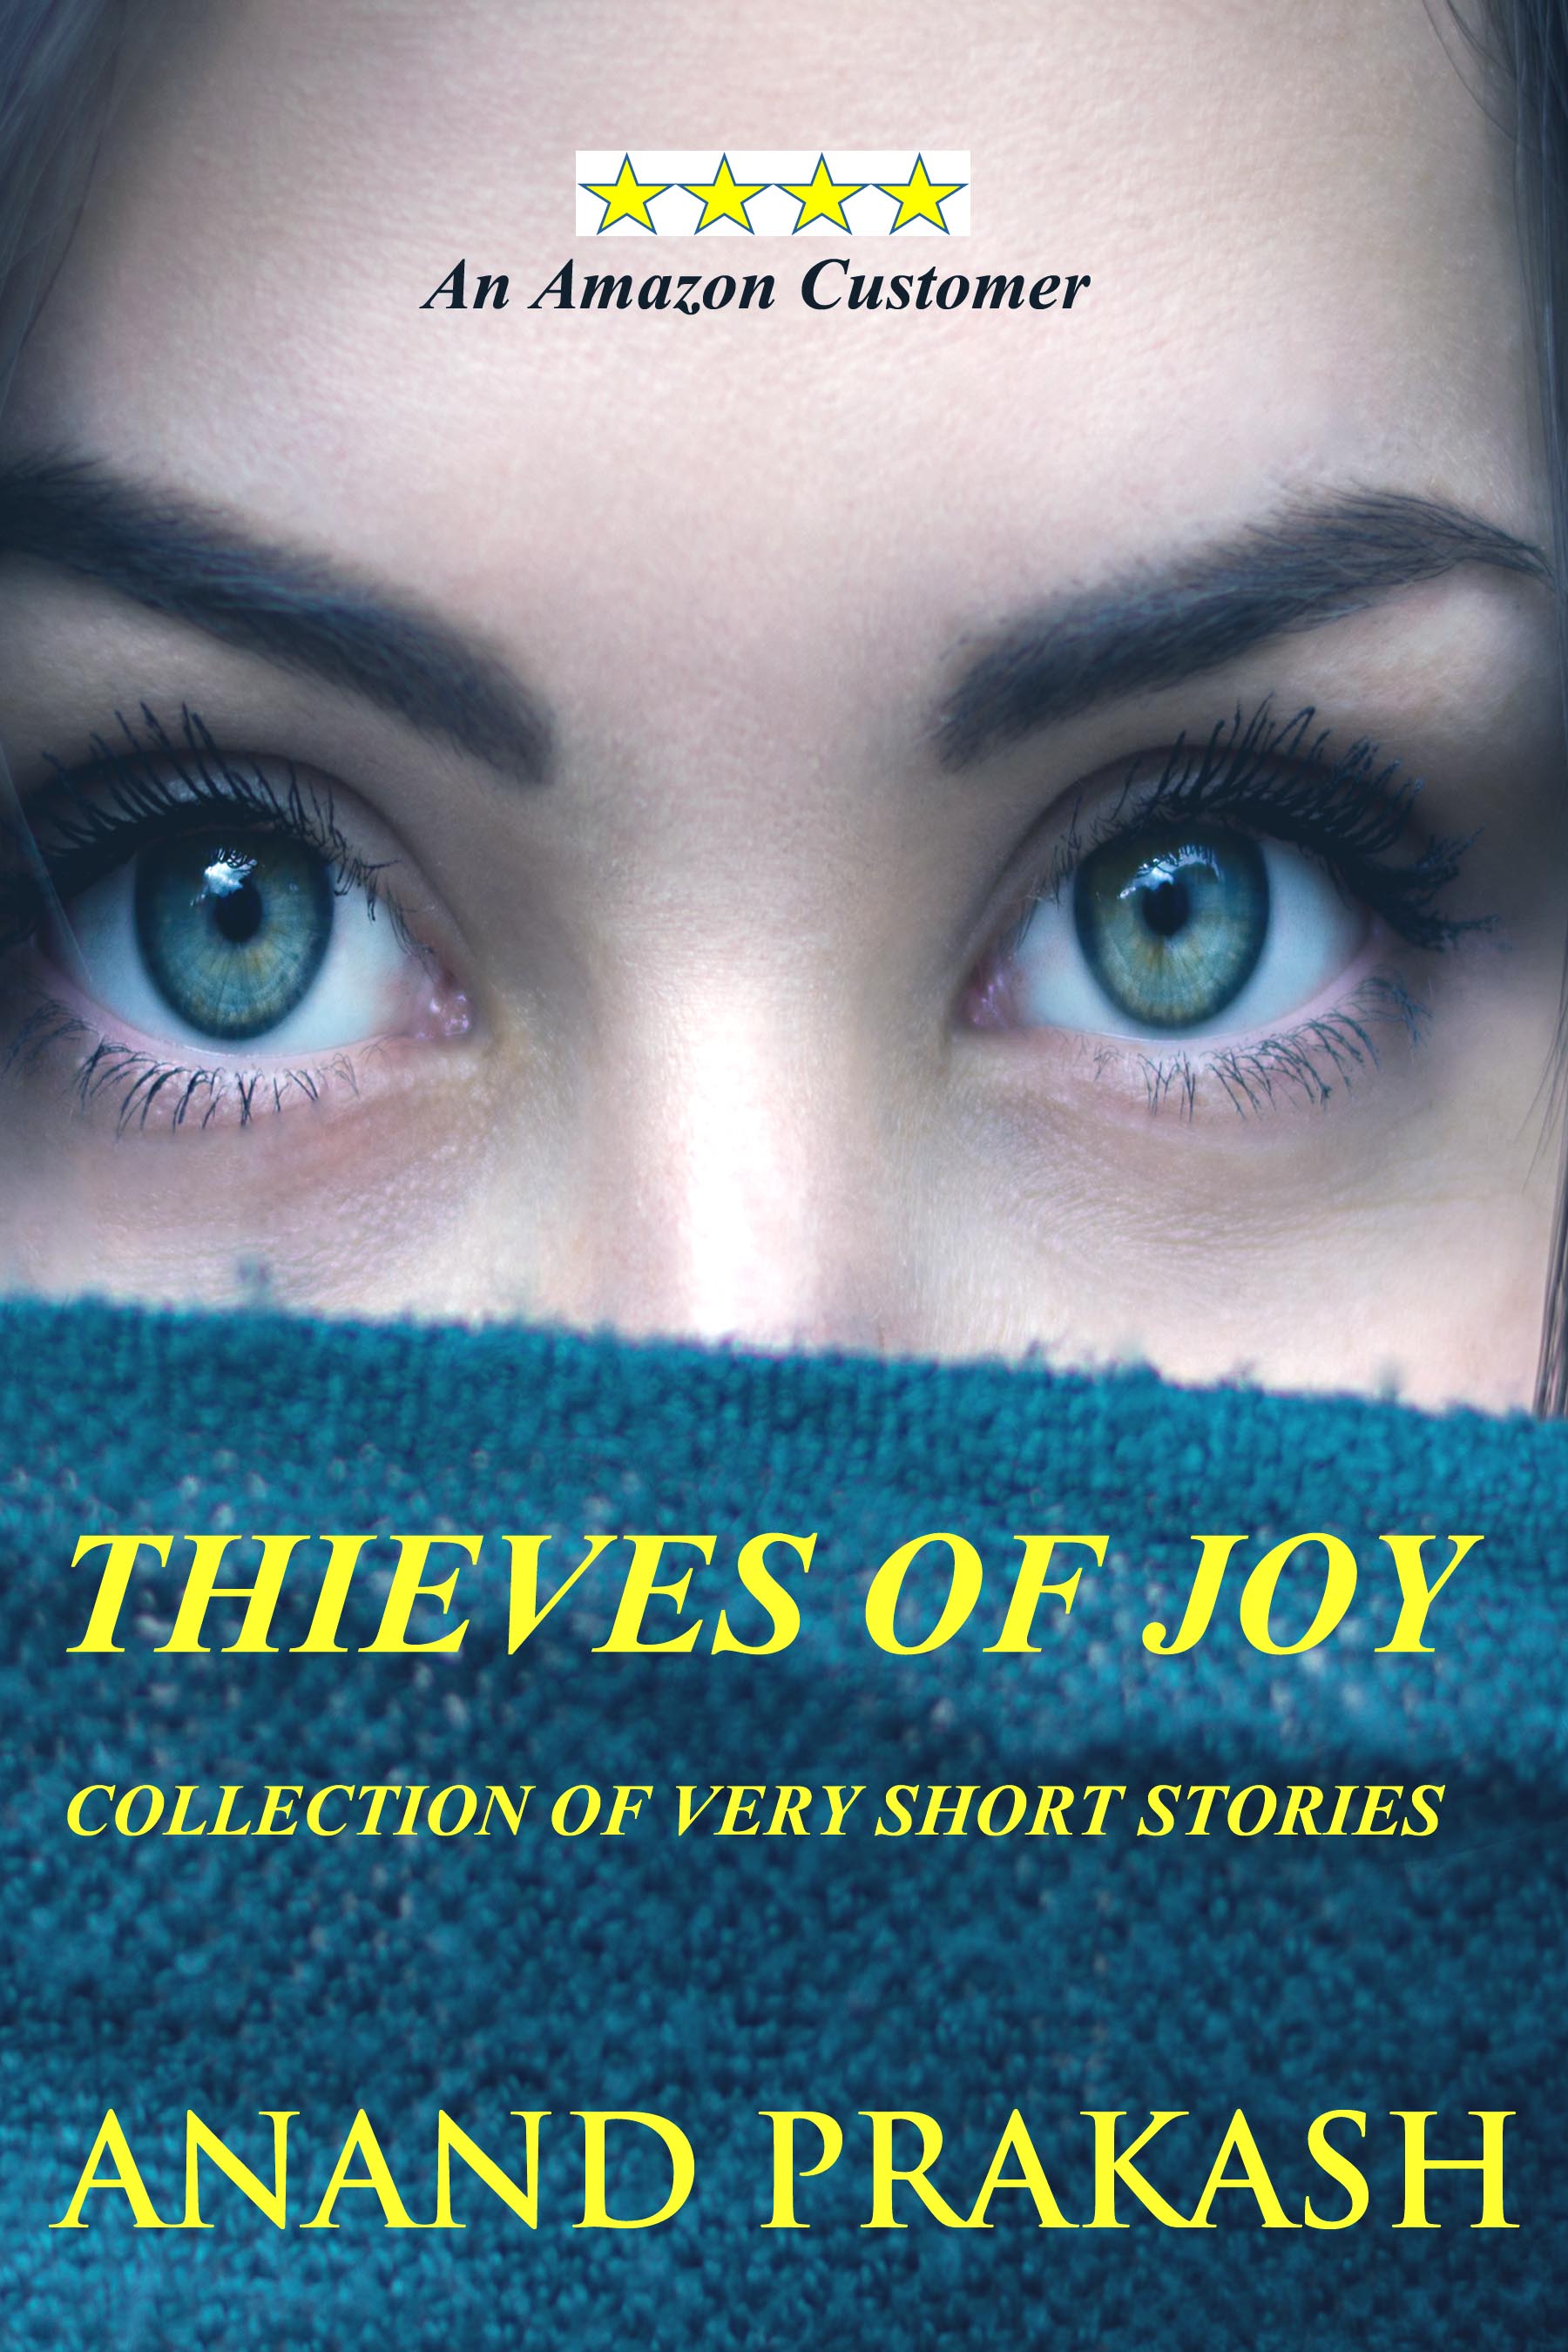 Thieves of Joy (Collection of Very Short Stories)